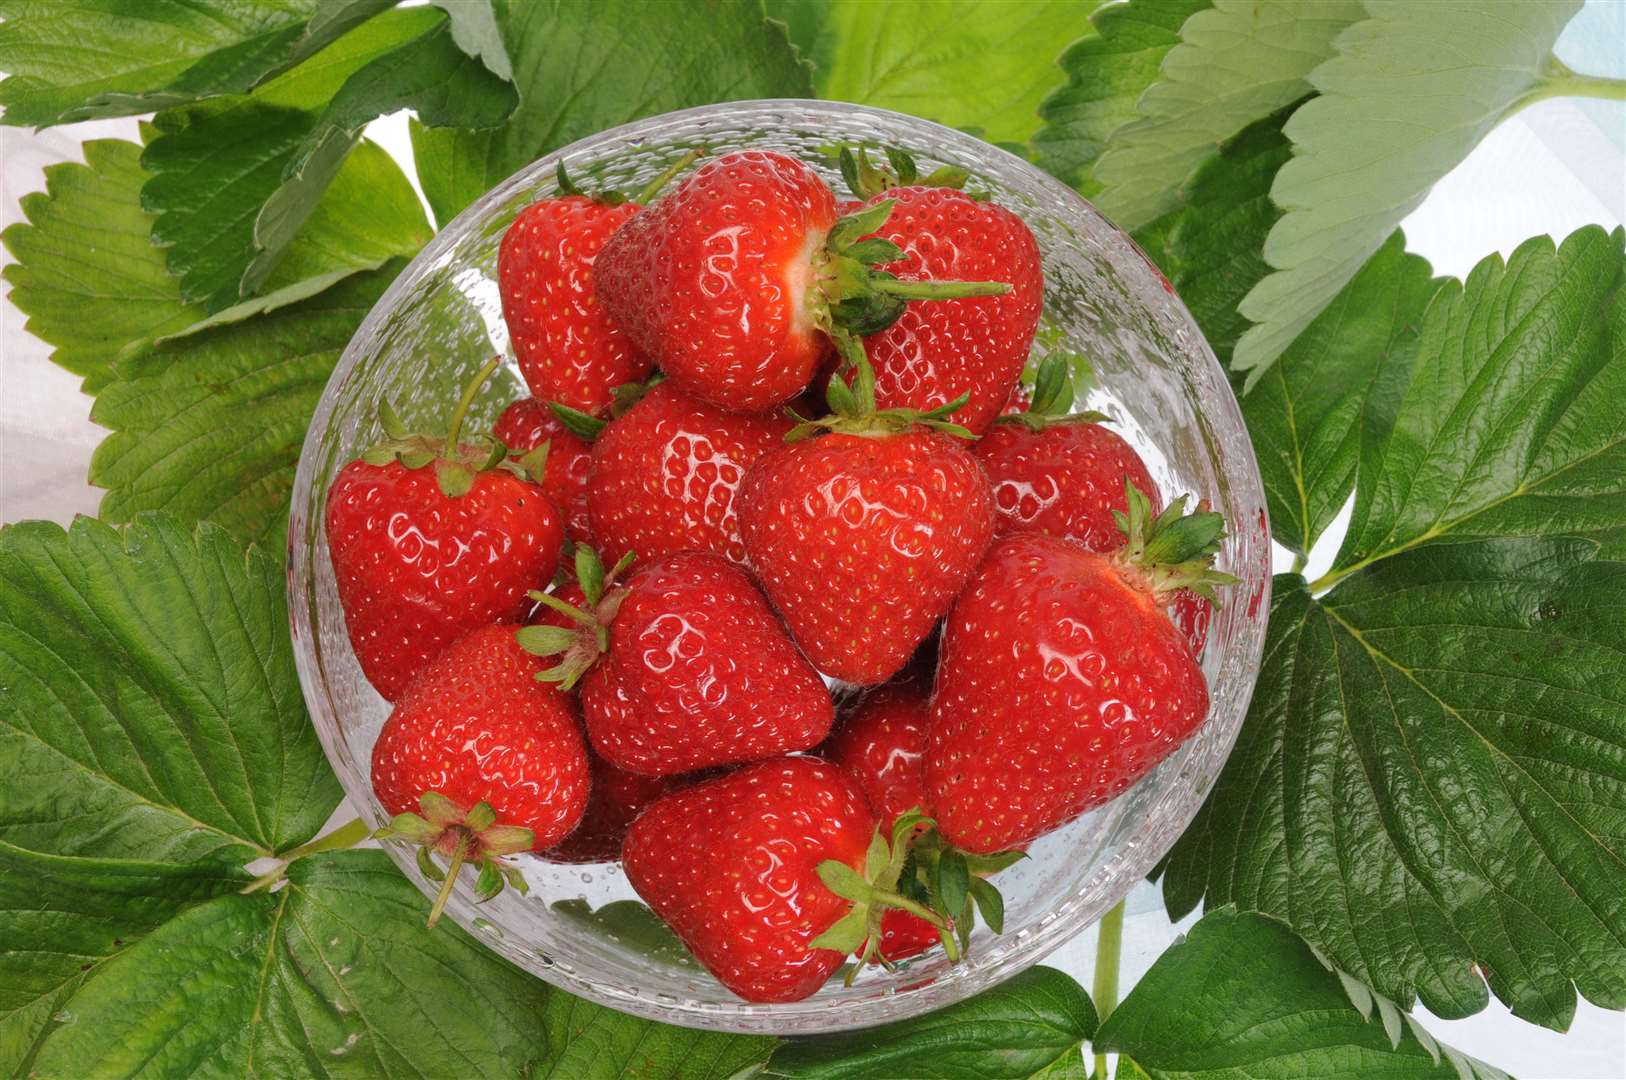 Malling Centenary strawberries - one of the varies developed at the NIAB EMR. Picture: NIAB EMR